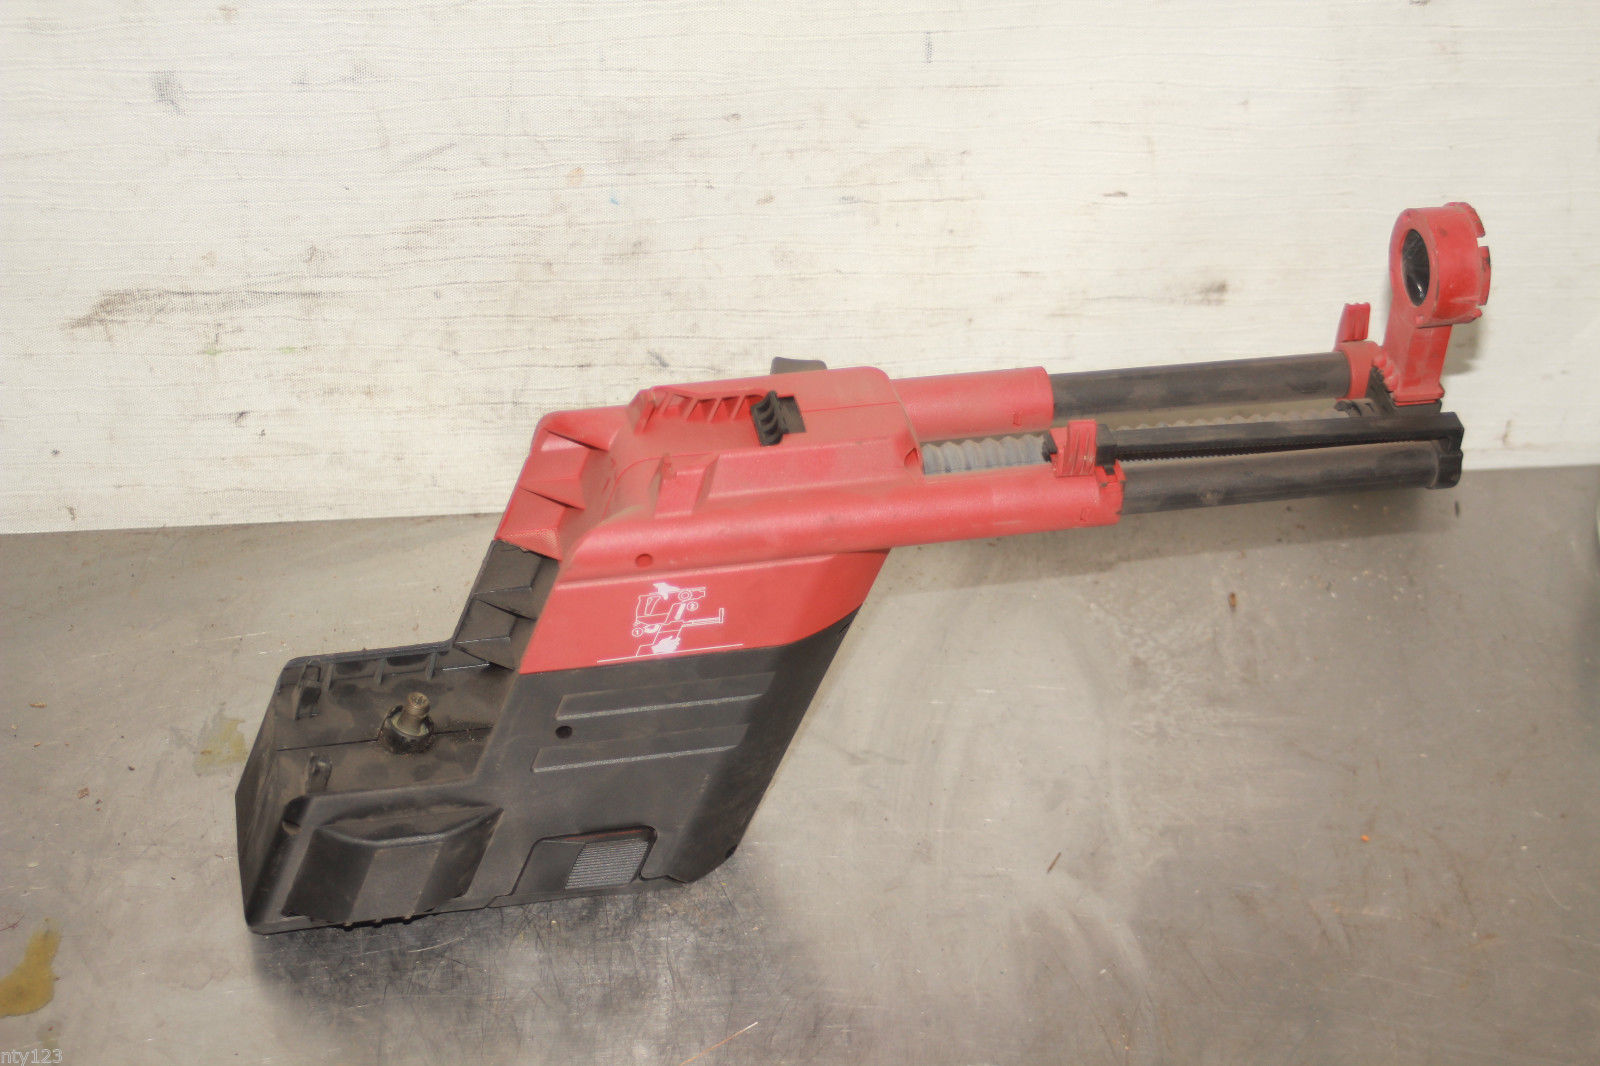 hilti dust extractor